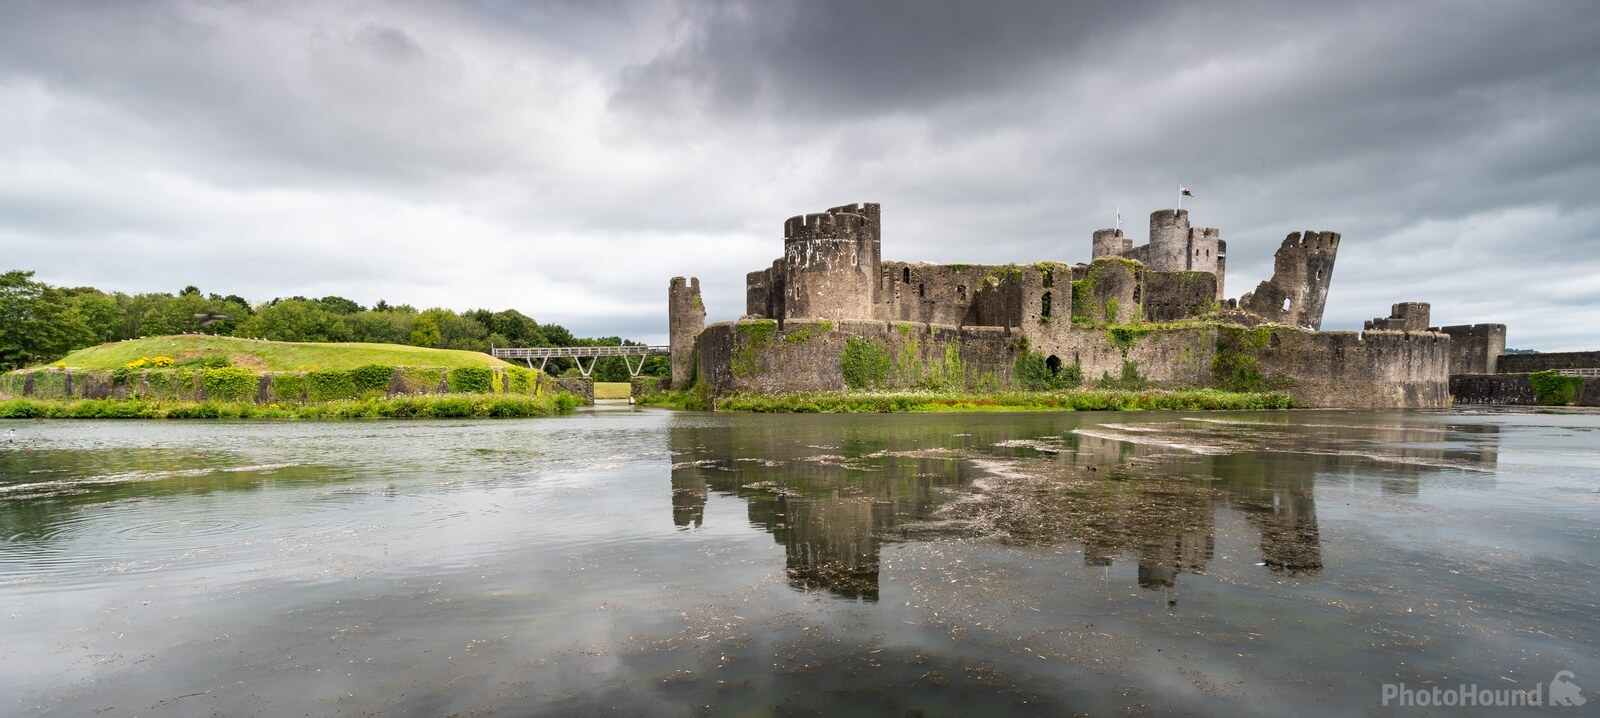 Image of Caerphilly Castle by Margaret Cowell